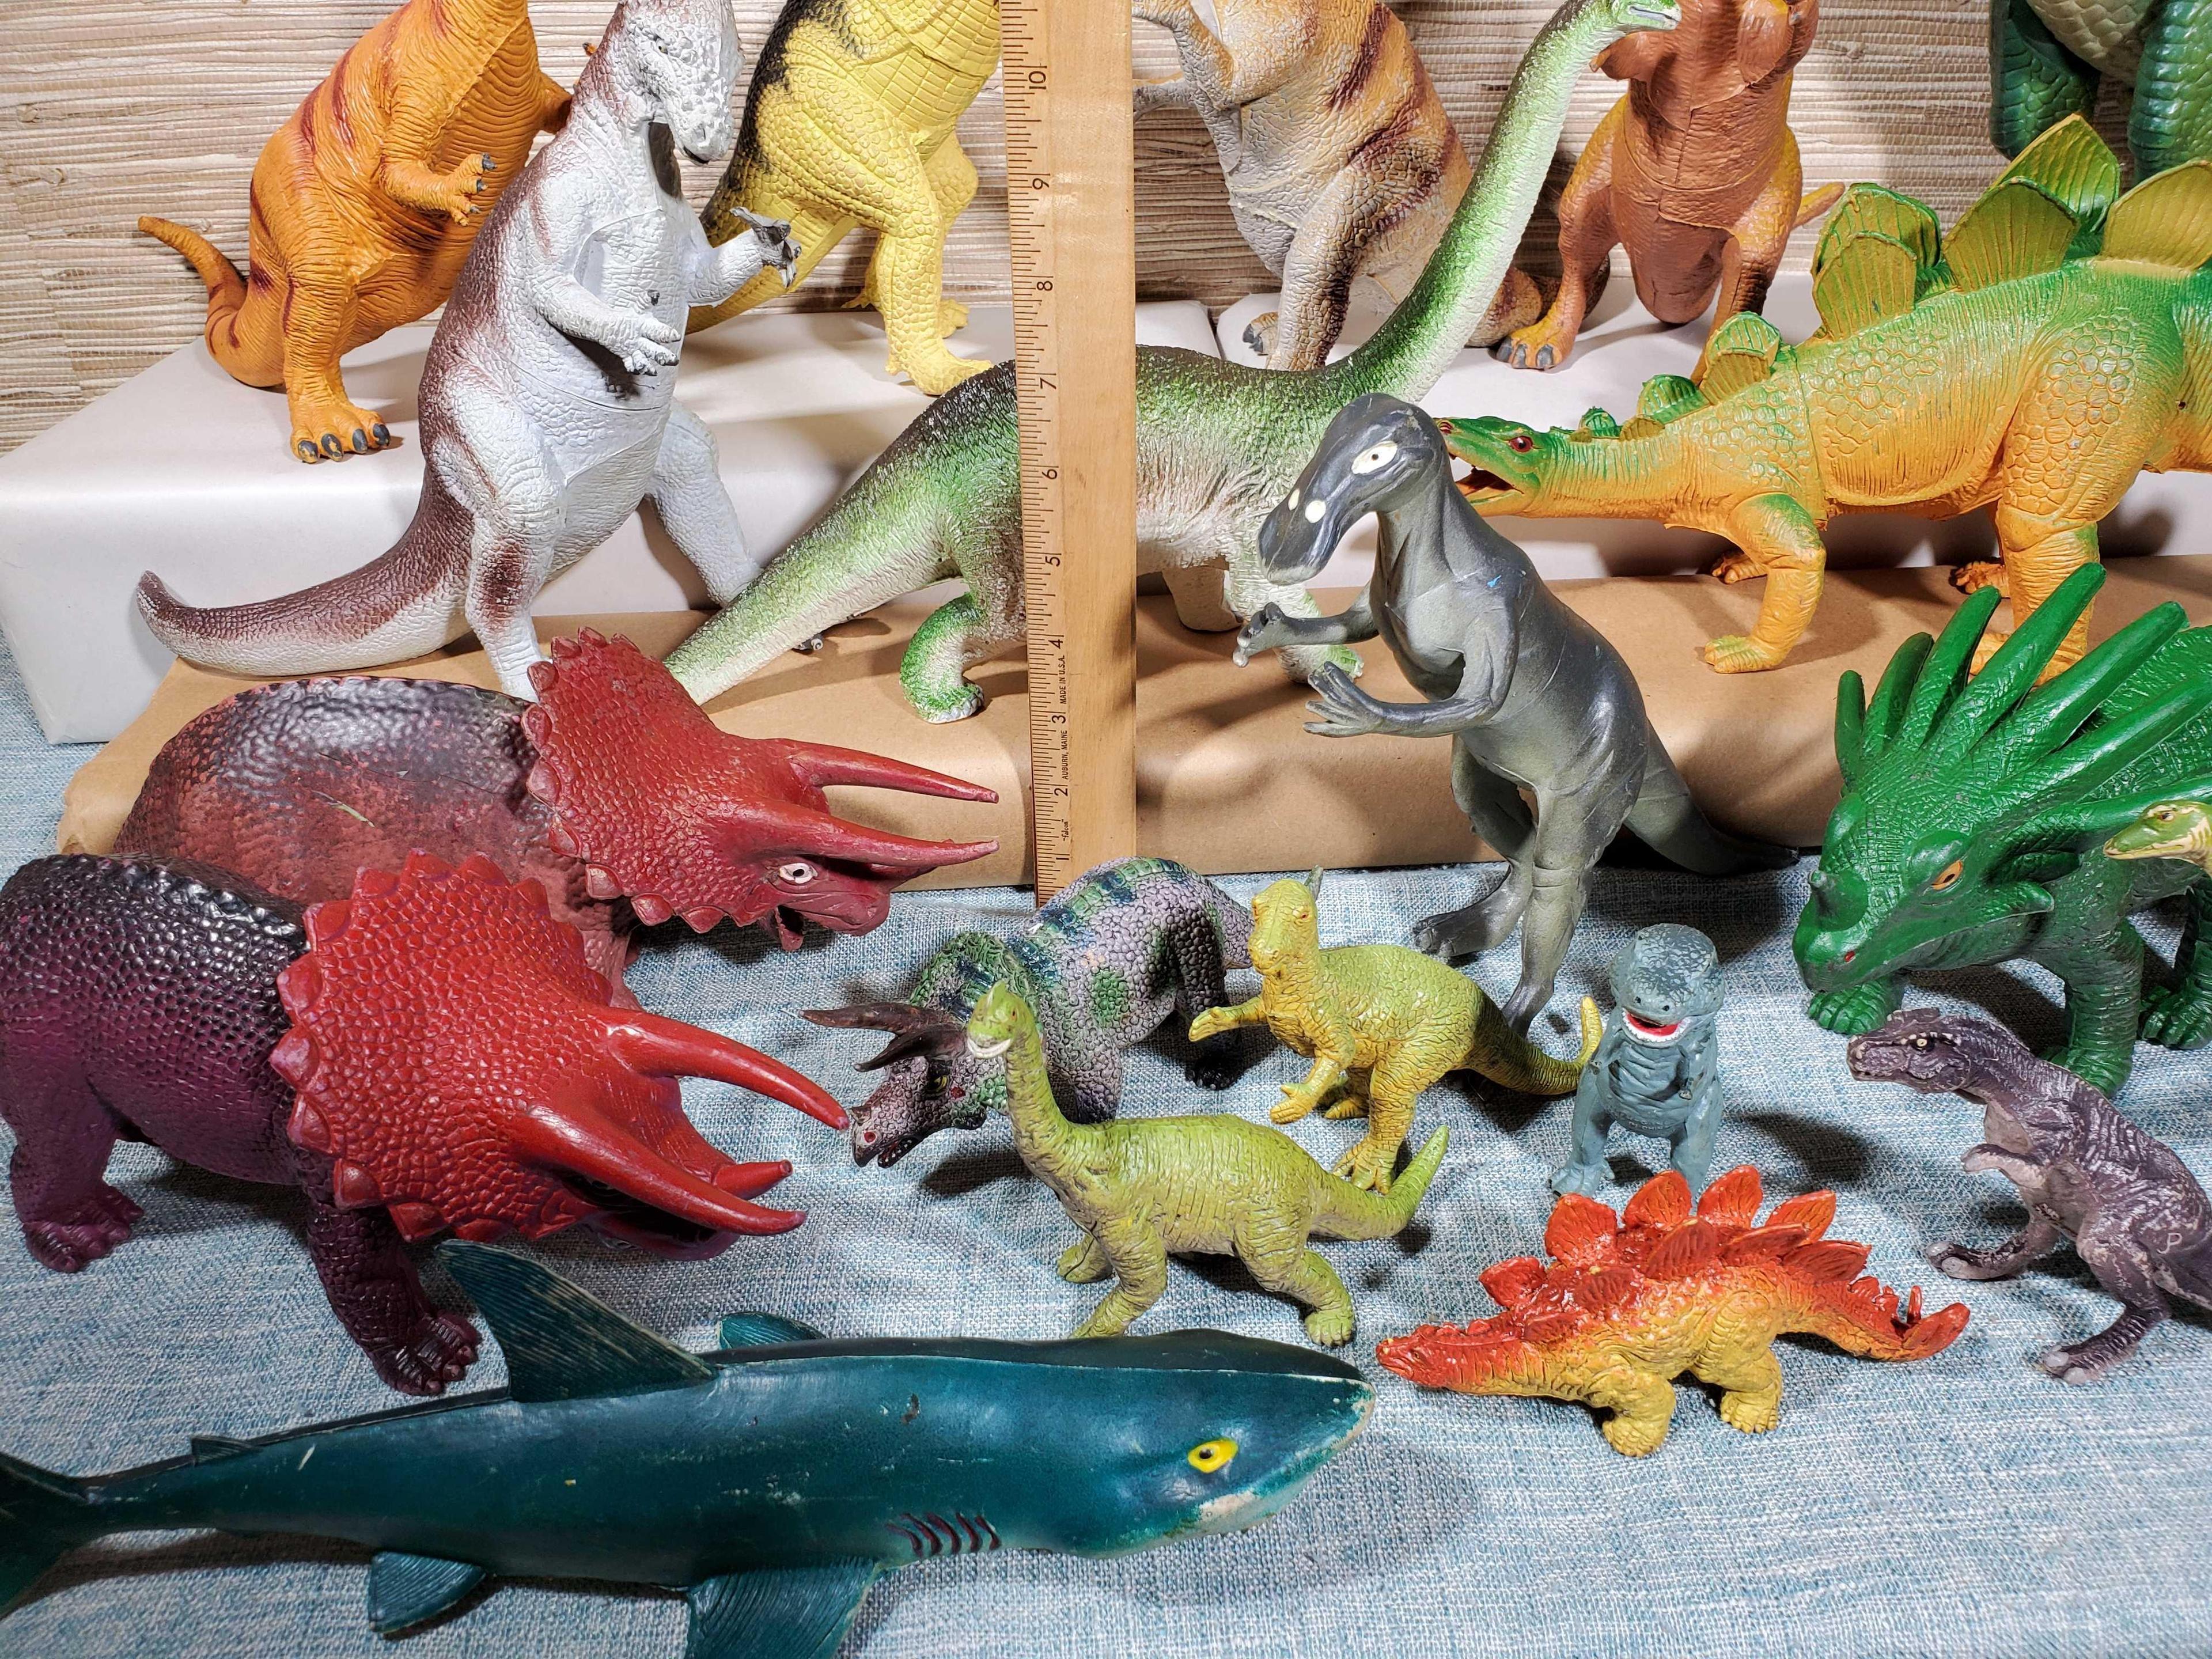 Fun Collection of Realistic Plastic Dinosaurs in a Variety of Sizes